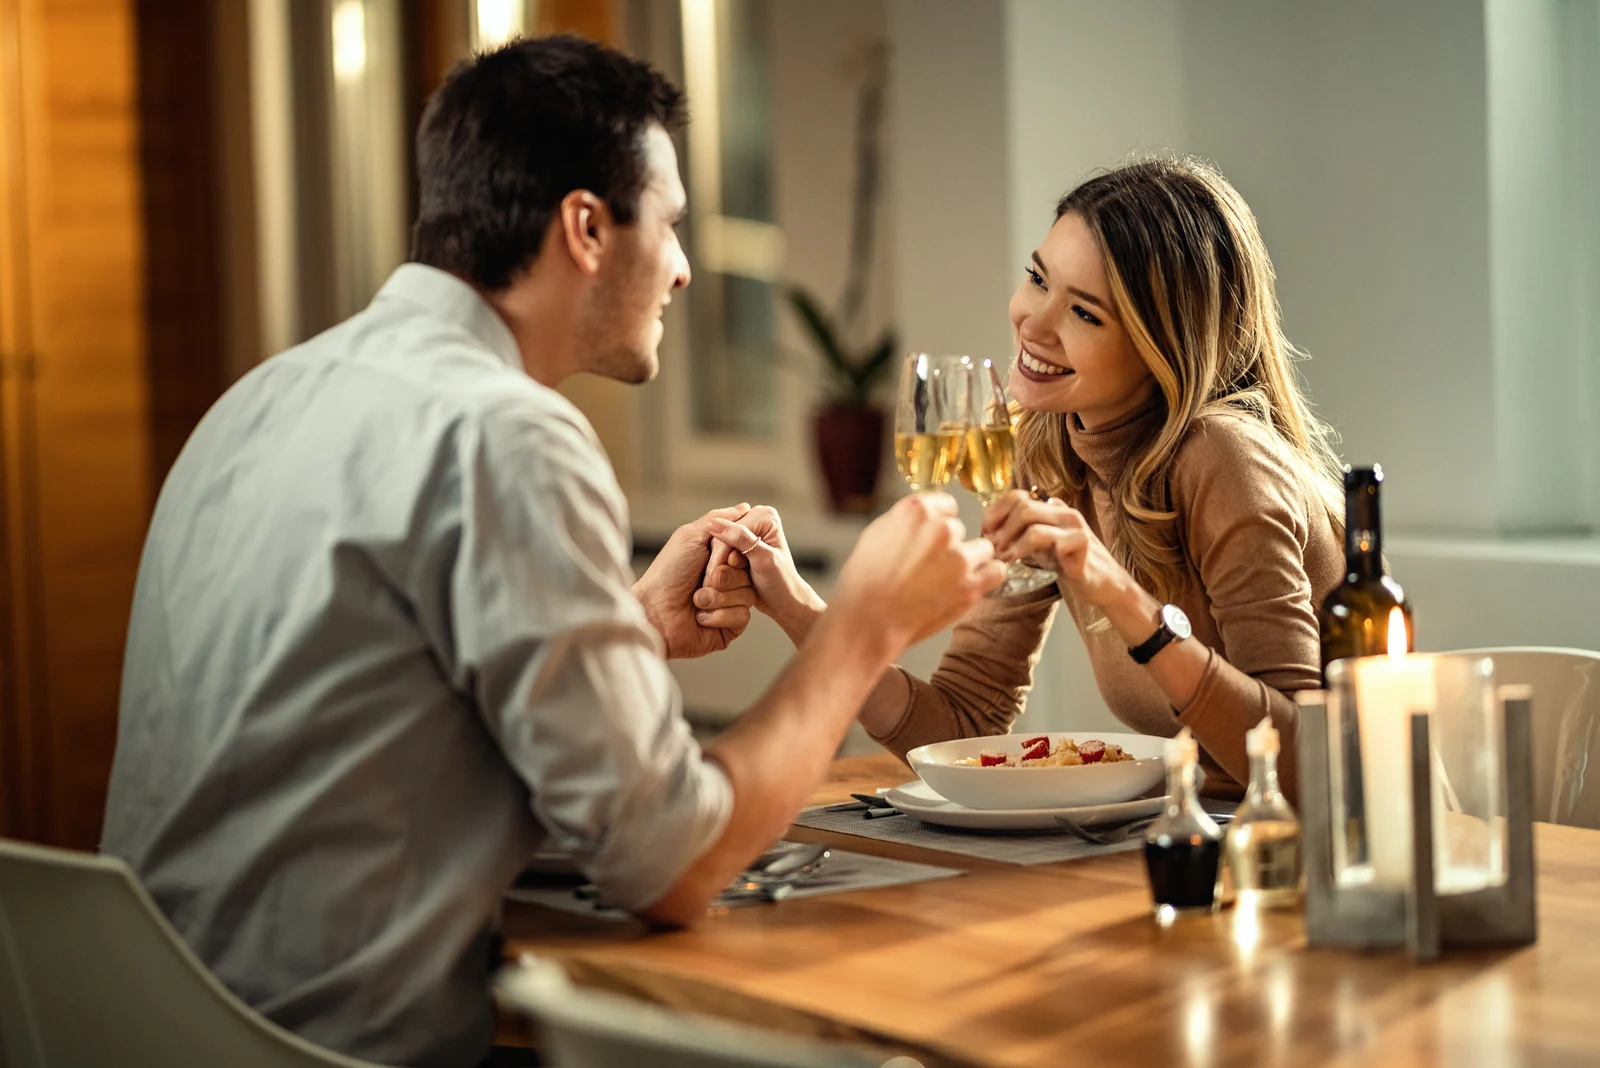 the man holds the woman's hand as they sit down to dinner